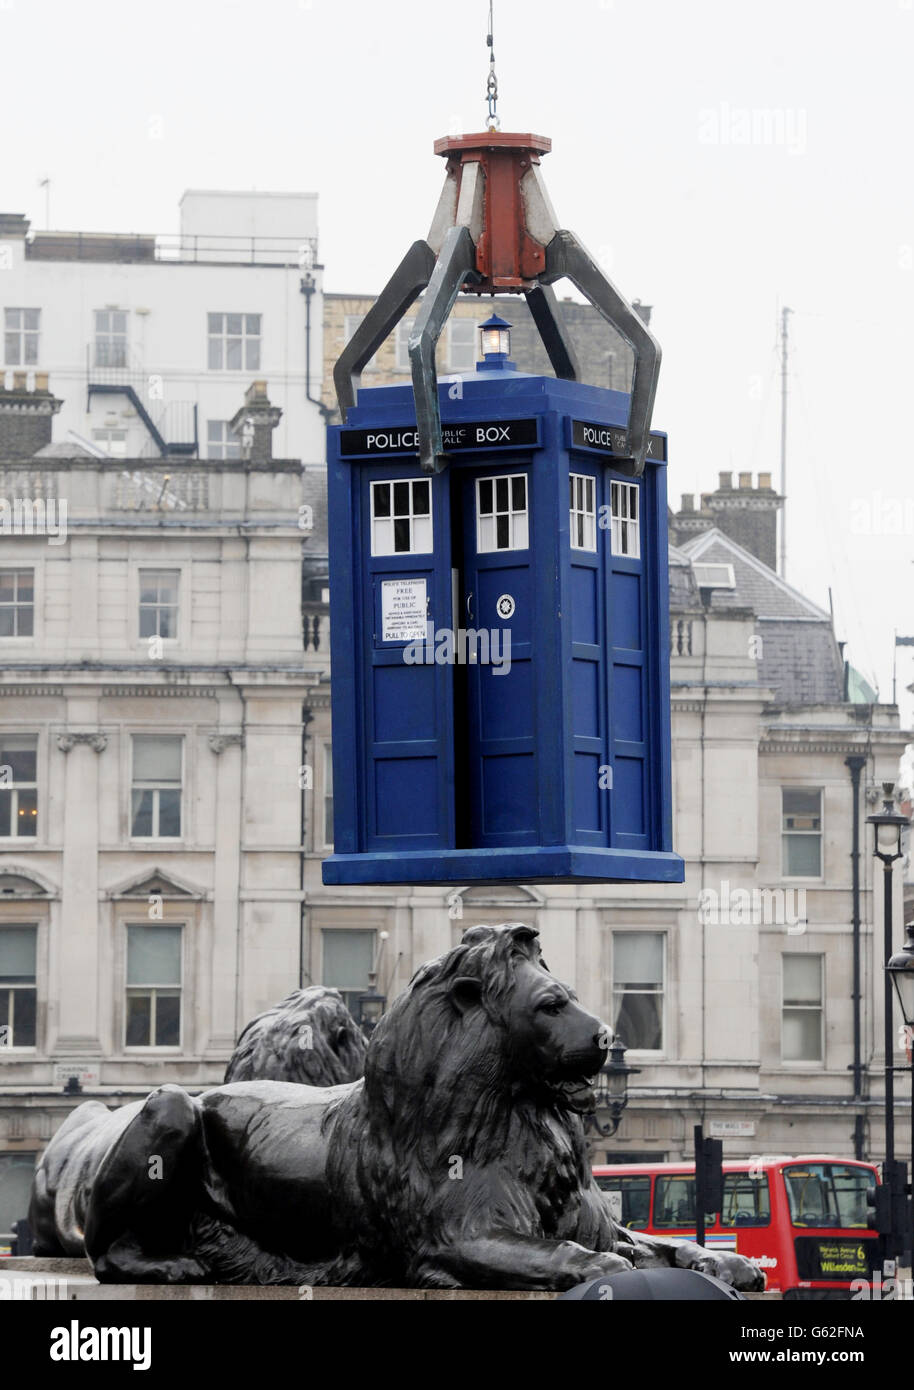 Doctor Who filming - London Stock Photo